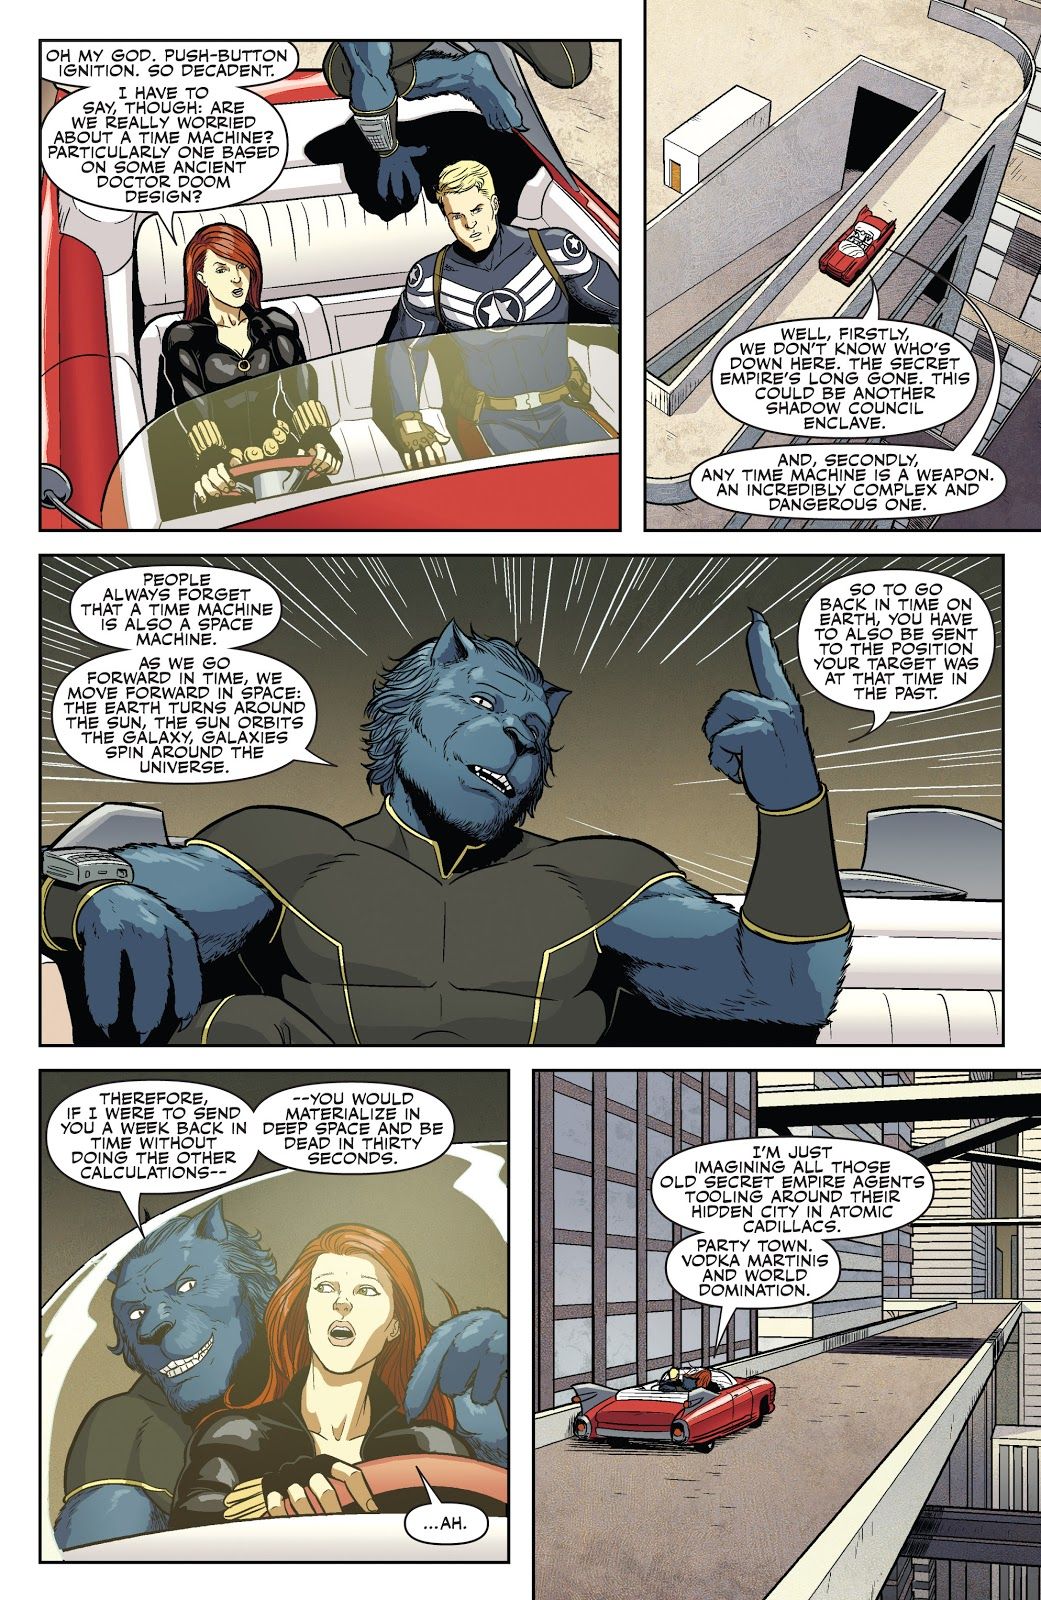 The X-men’s Beast Points Out The Problem With Time Machines In Comics